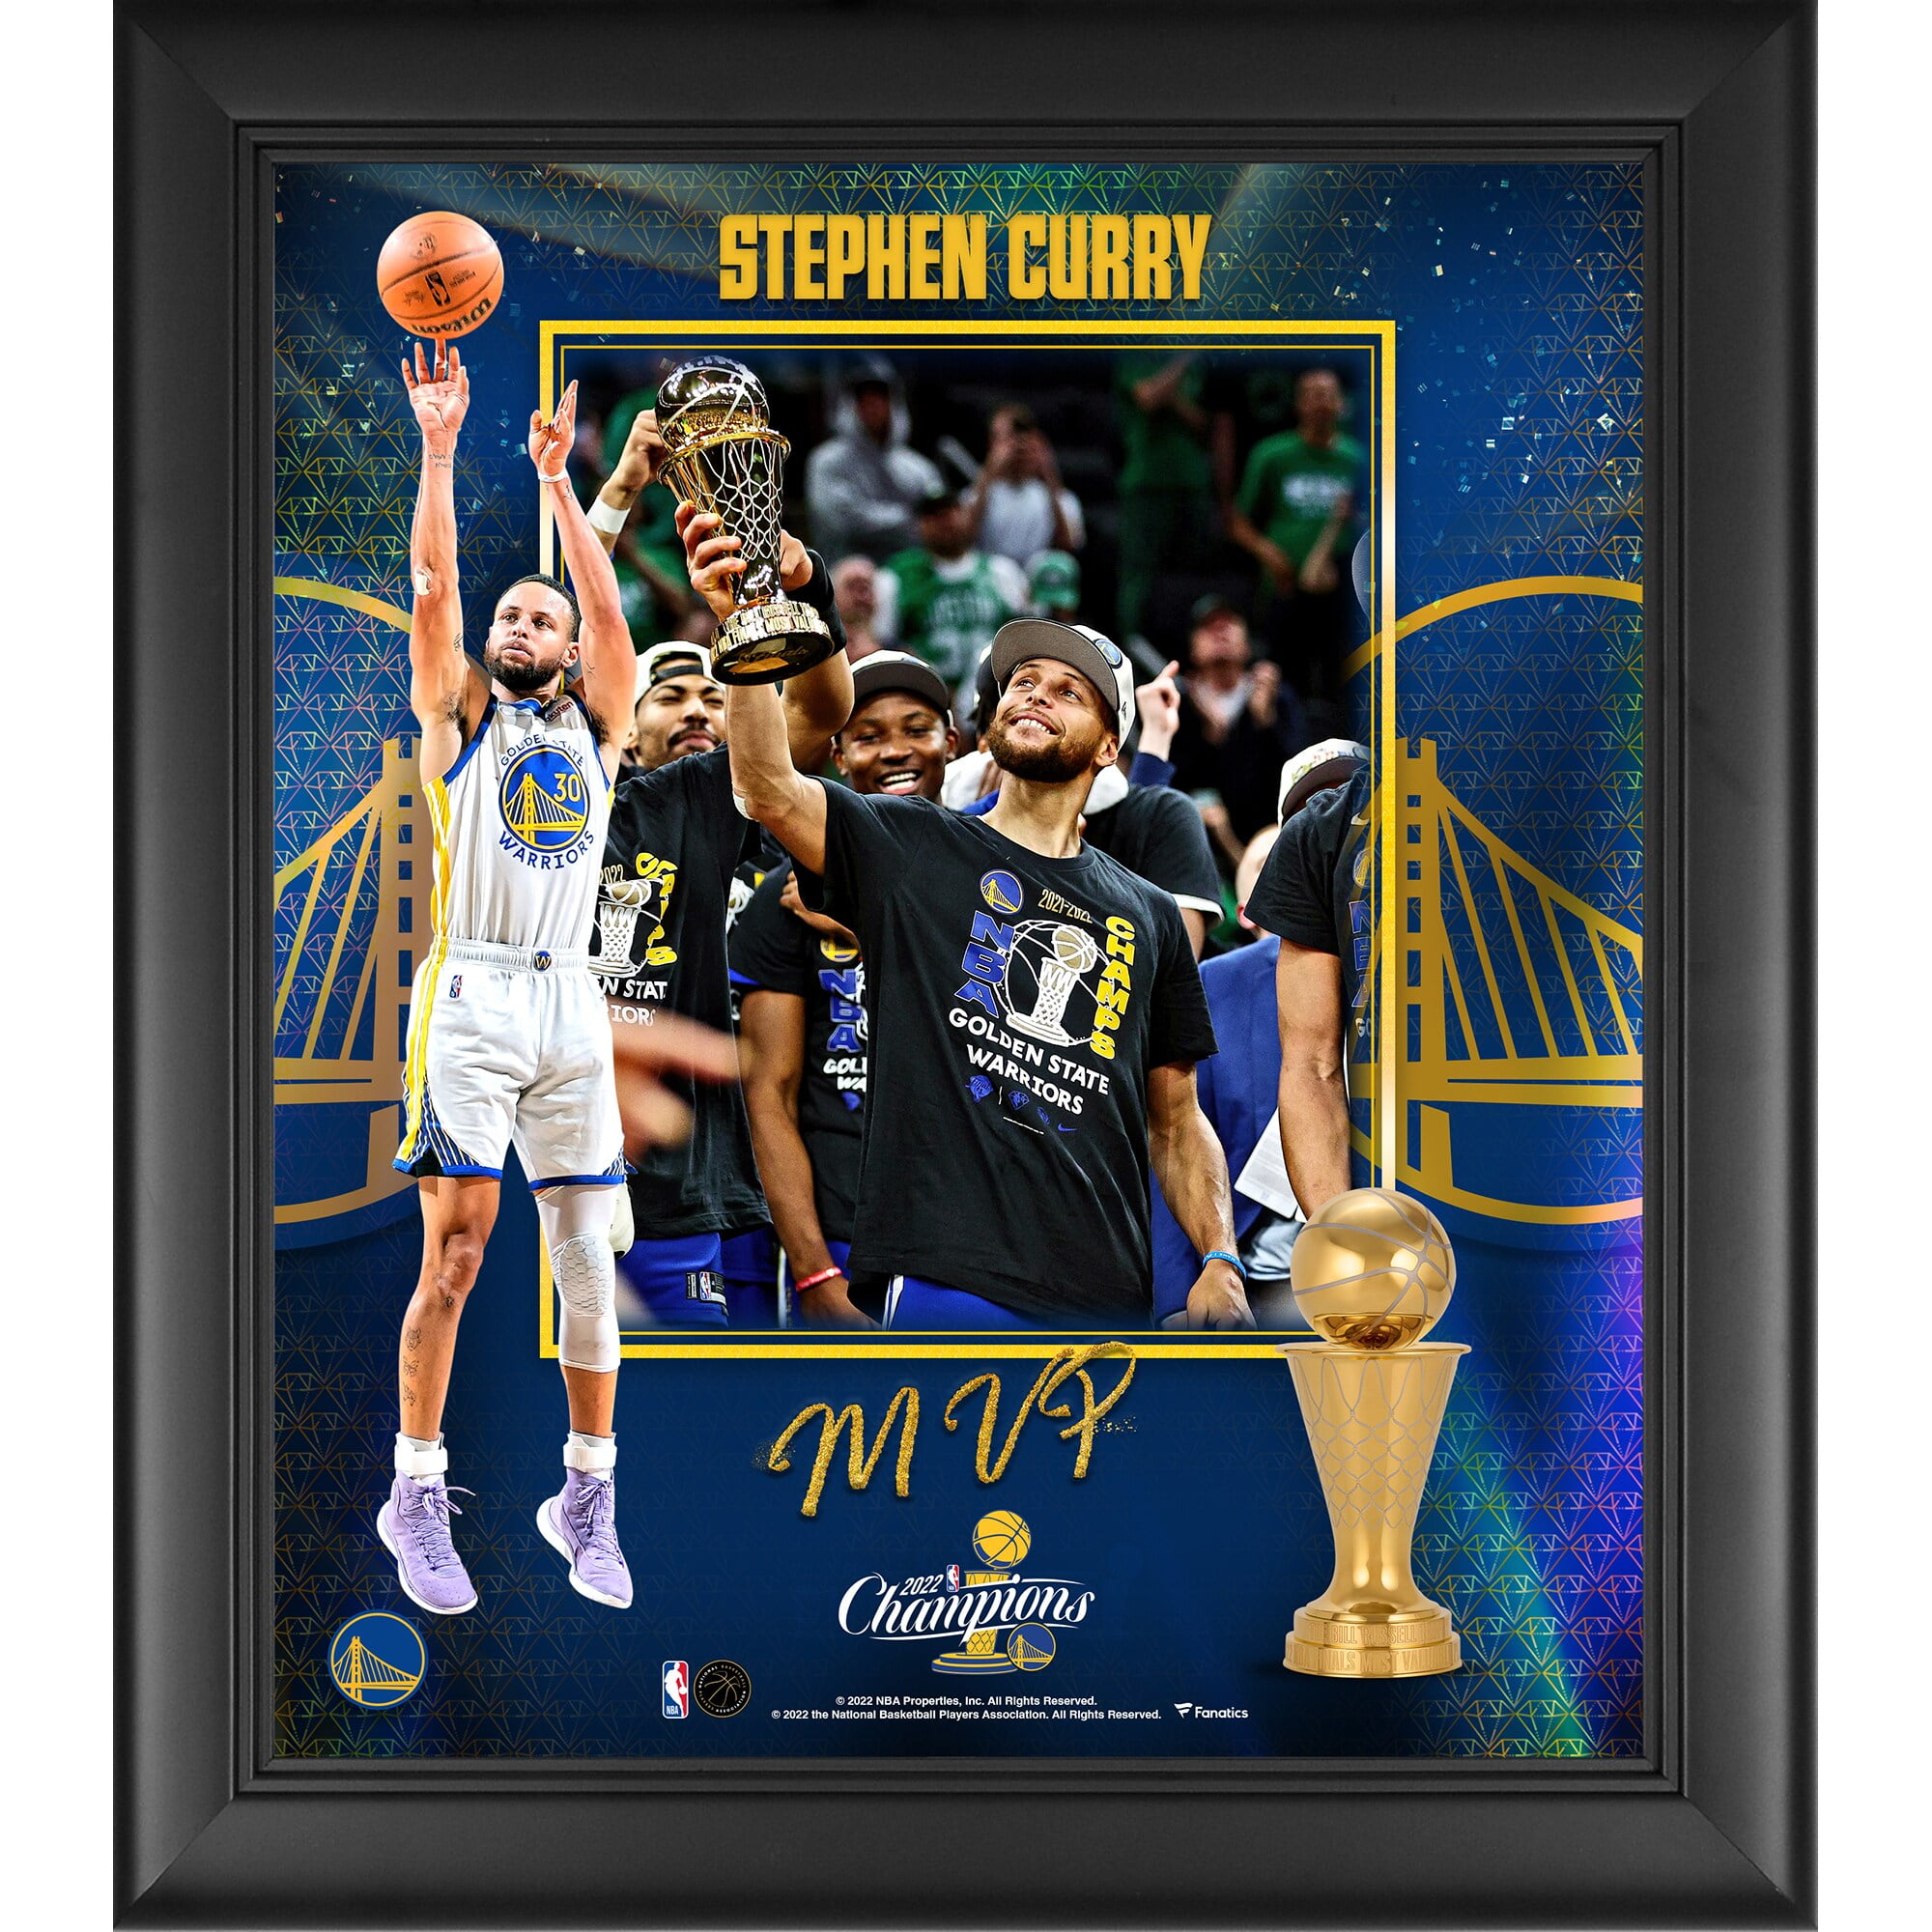 Buy Awesome 2022 Stephen Curry NBA All-star MVP Shirt For Free Shipping  CUSTOM XMAS PRODUCT COMPANY